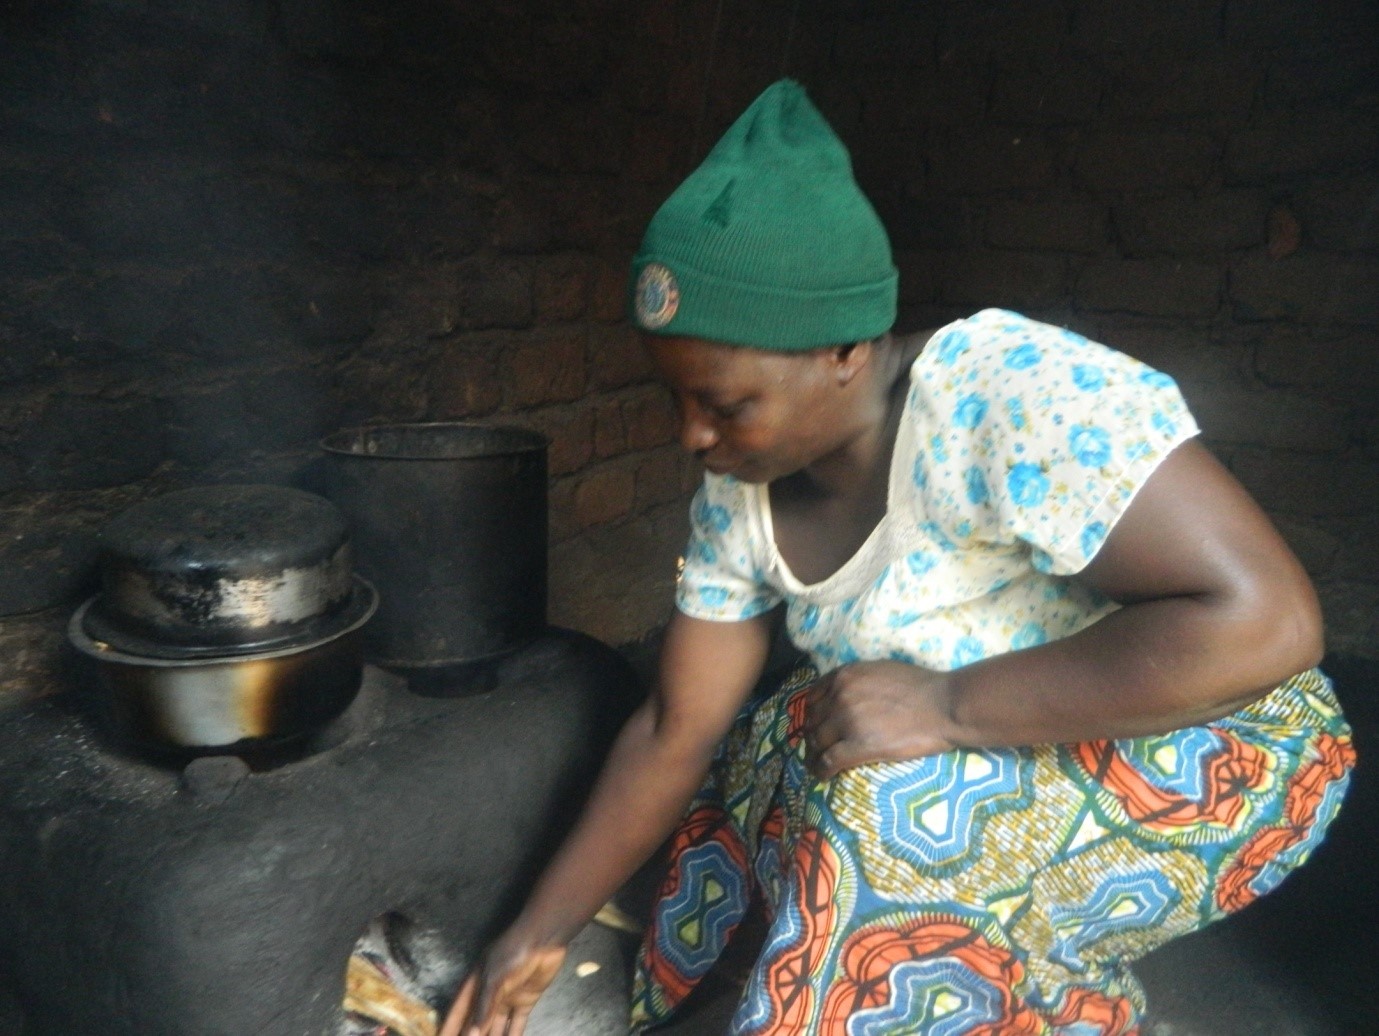 Doreen inserts a piece of firewood into a firewood savingstove in her kitchen